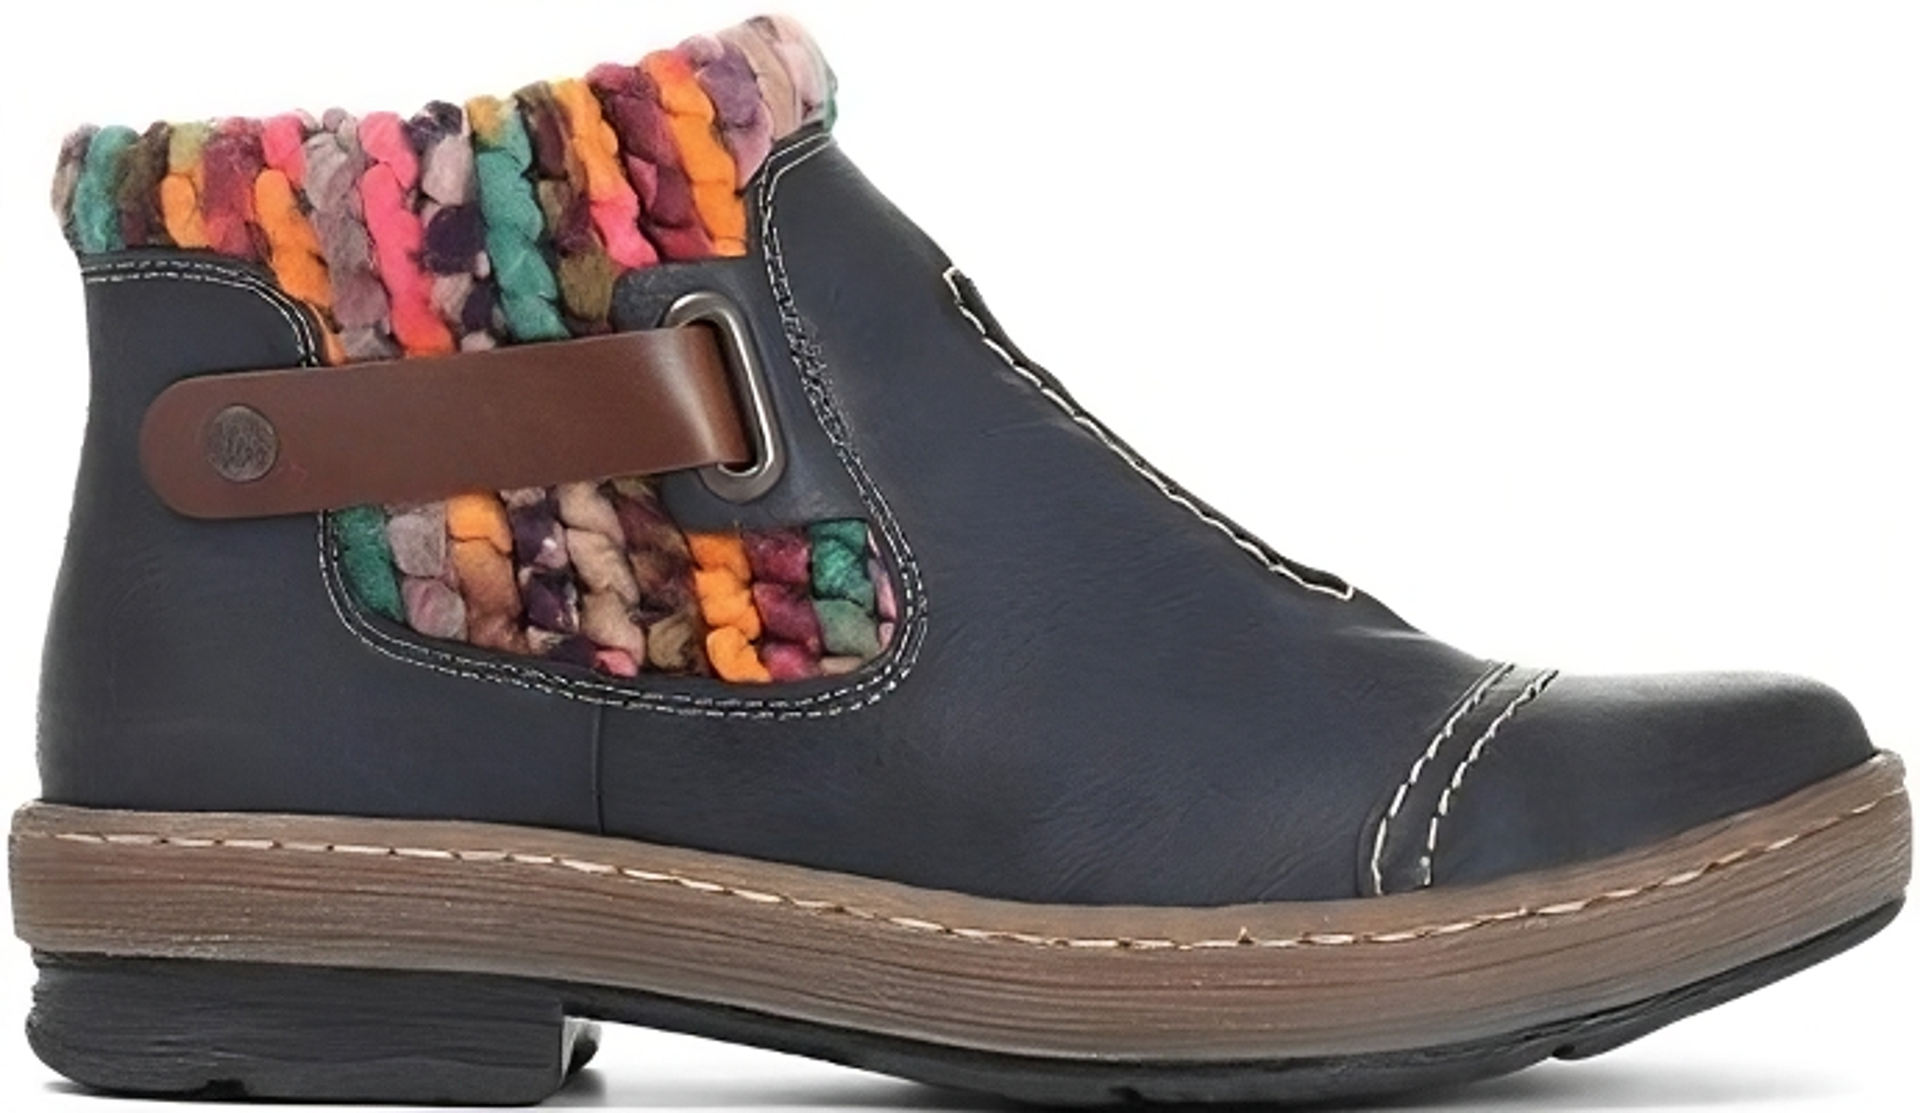  Casual Ankle Boot by Rieker available at Pavers Shoes. Multi-coloured knitted cuff. 